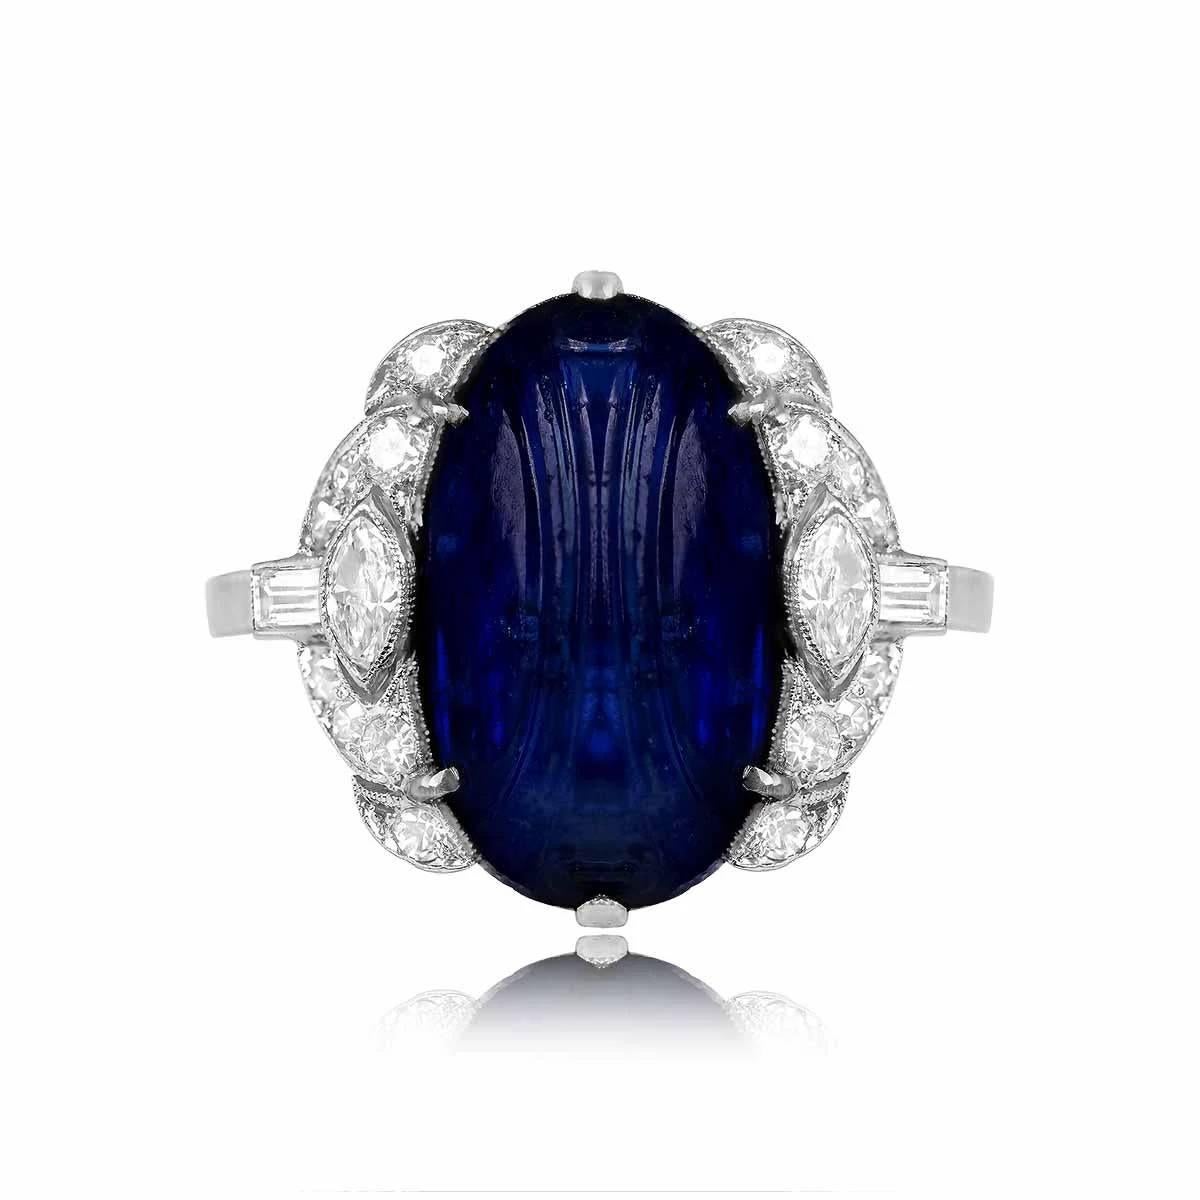 This exquisite Art Deco ring showcases an 8.64-carat natural Burmese-carved cabochon sapphire as its centerpiece. Surrounding the sapphire are dazzling single-cut, marquise, and baguette-cut diamonds. Crafted in the 1920s, this antique ring is a